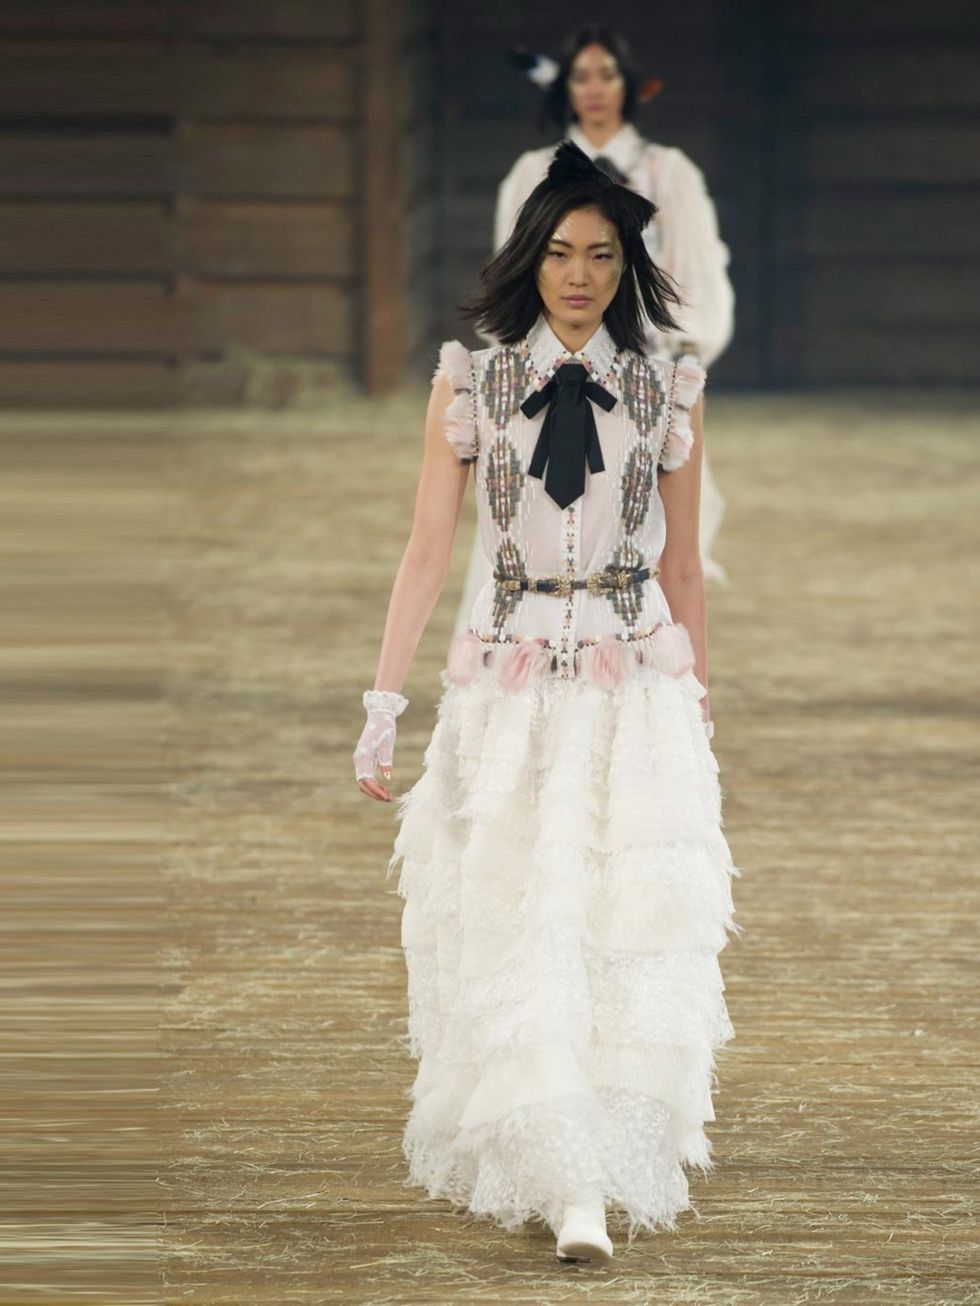 In pictures: Chanel heads to Texas for the Pre-Fall 2014 Metiers d